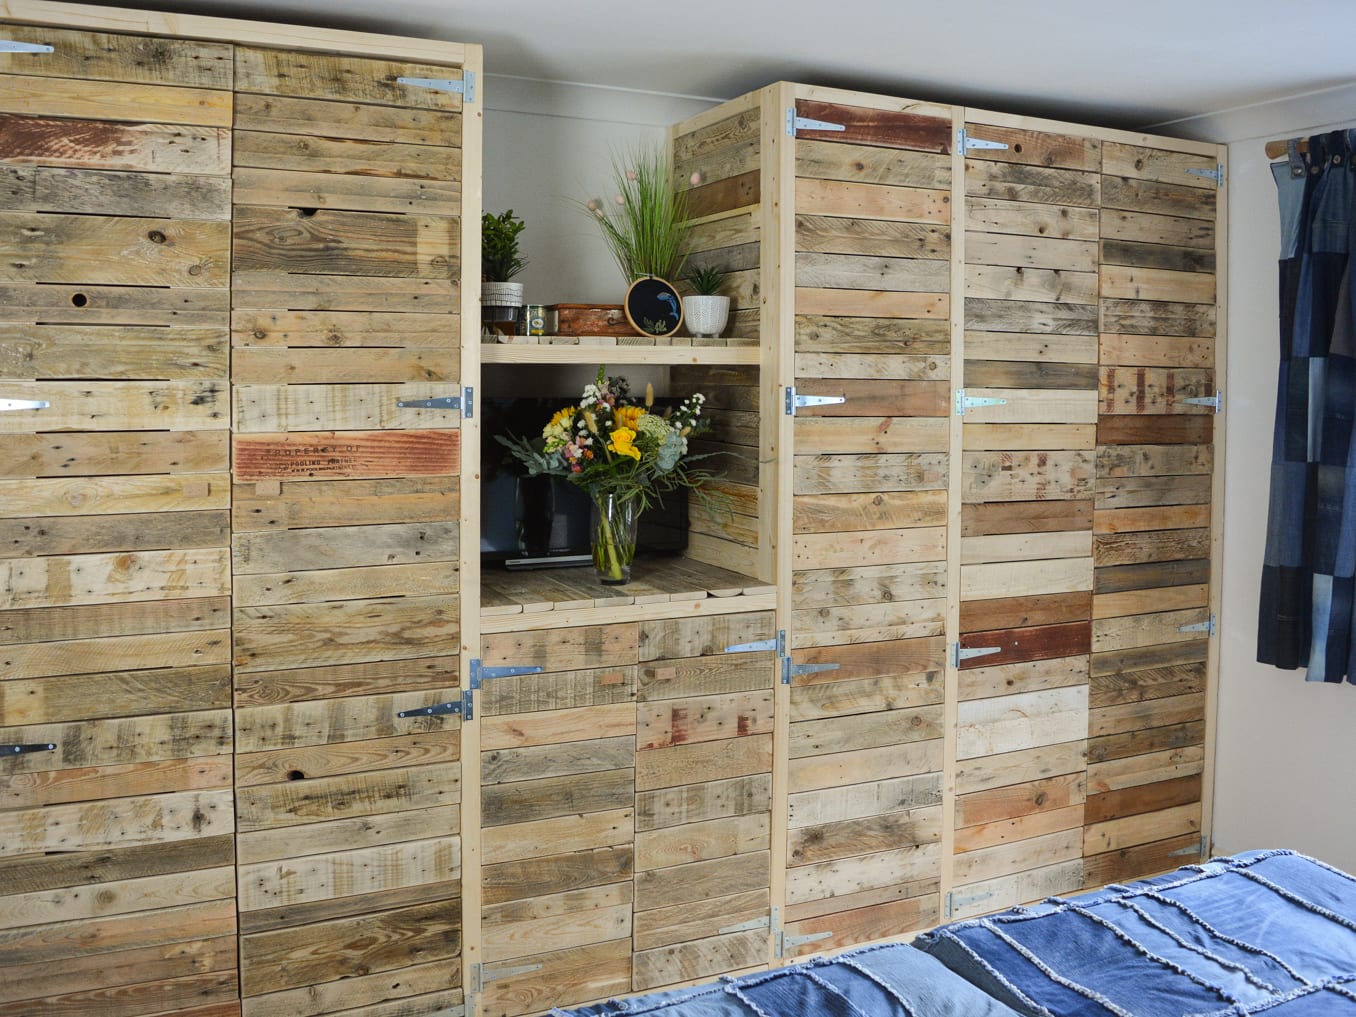 How to make a platform bed from pallets | My Thrifty Life by Cassie Fairy |  Inspiration for living a lovely life on a budget